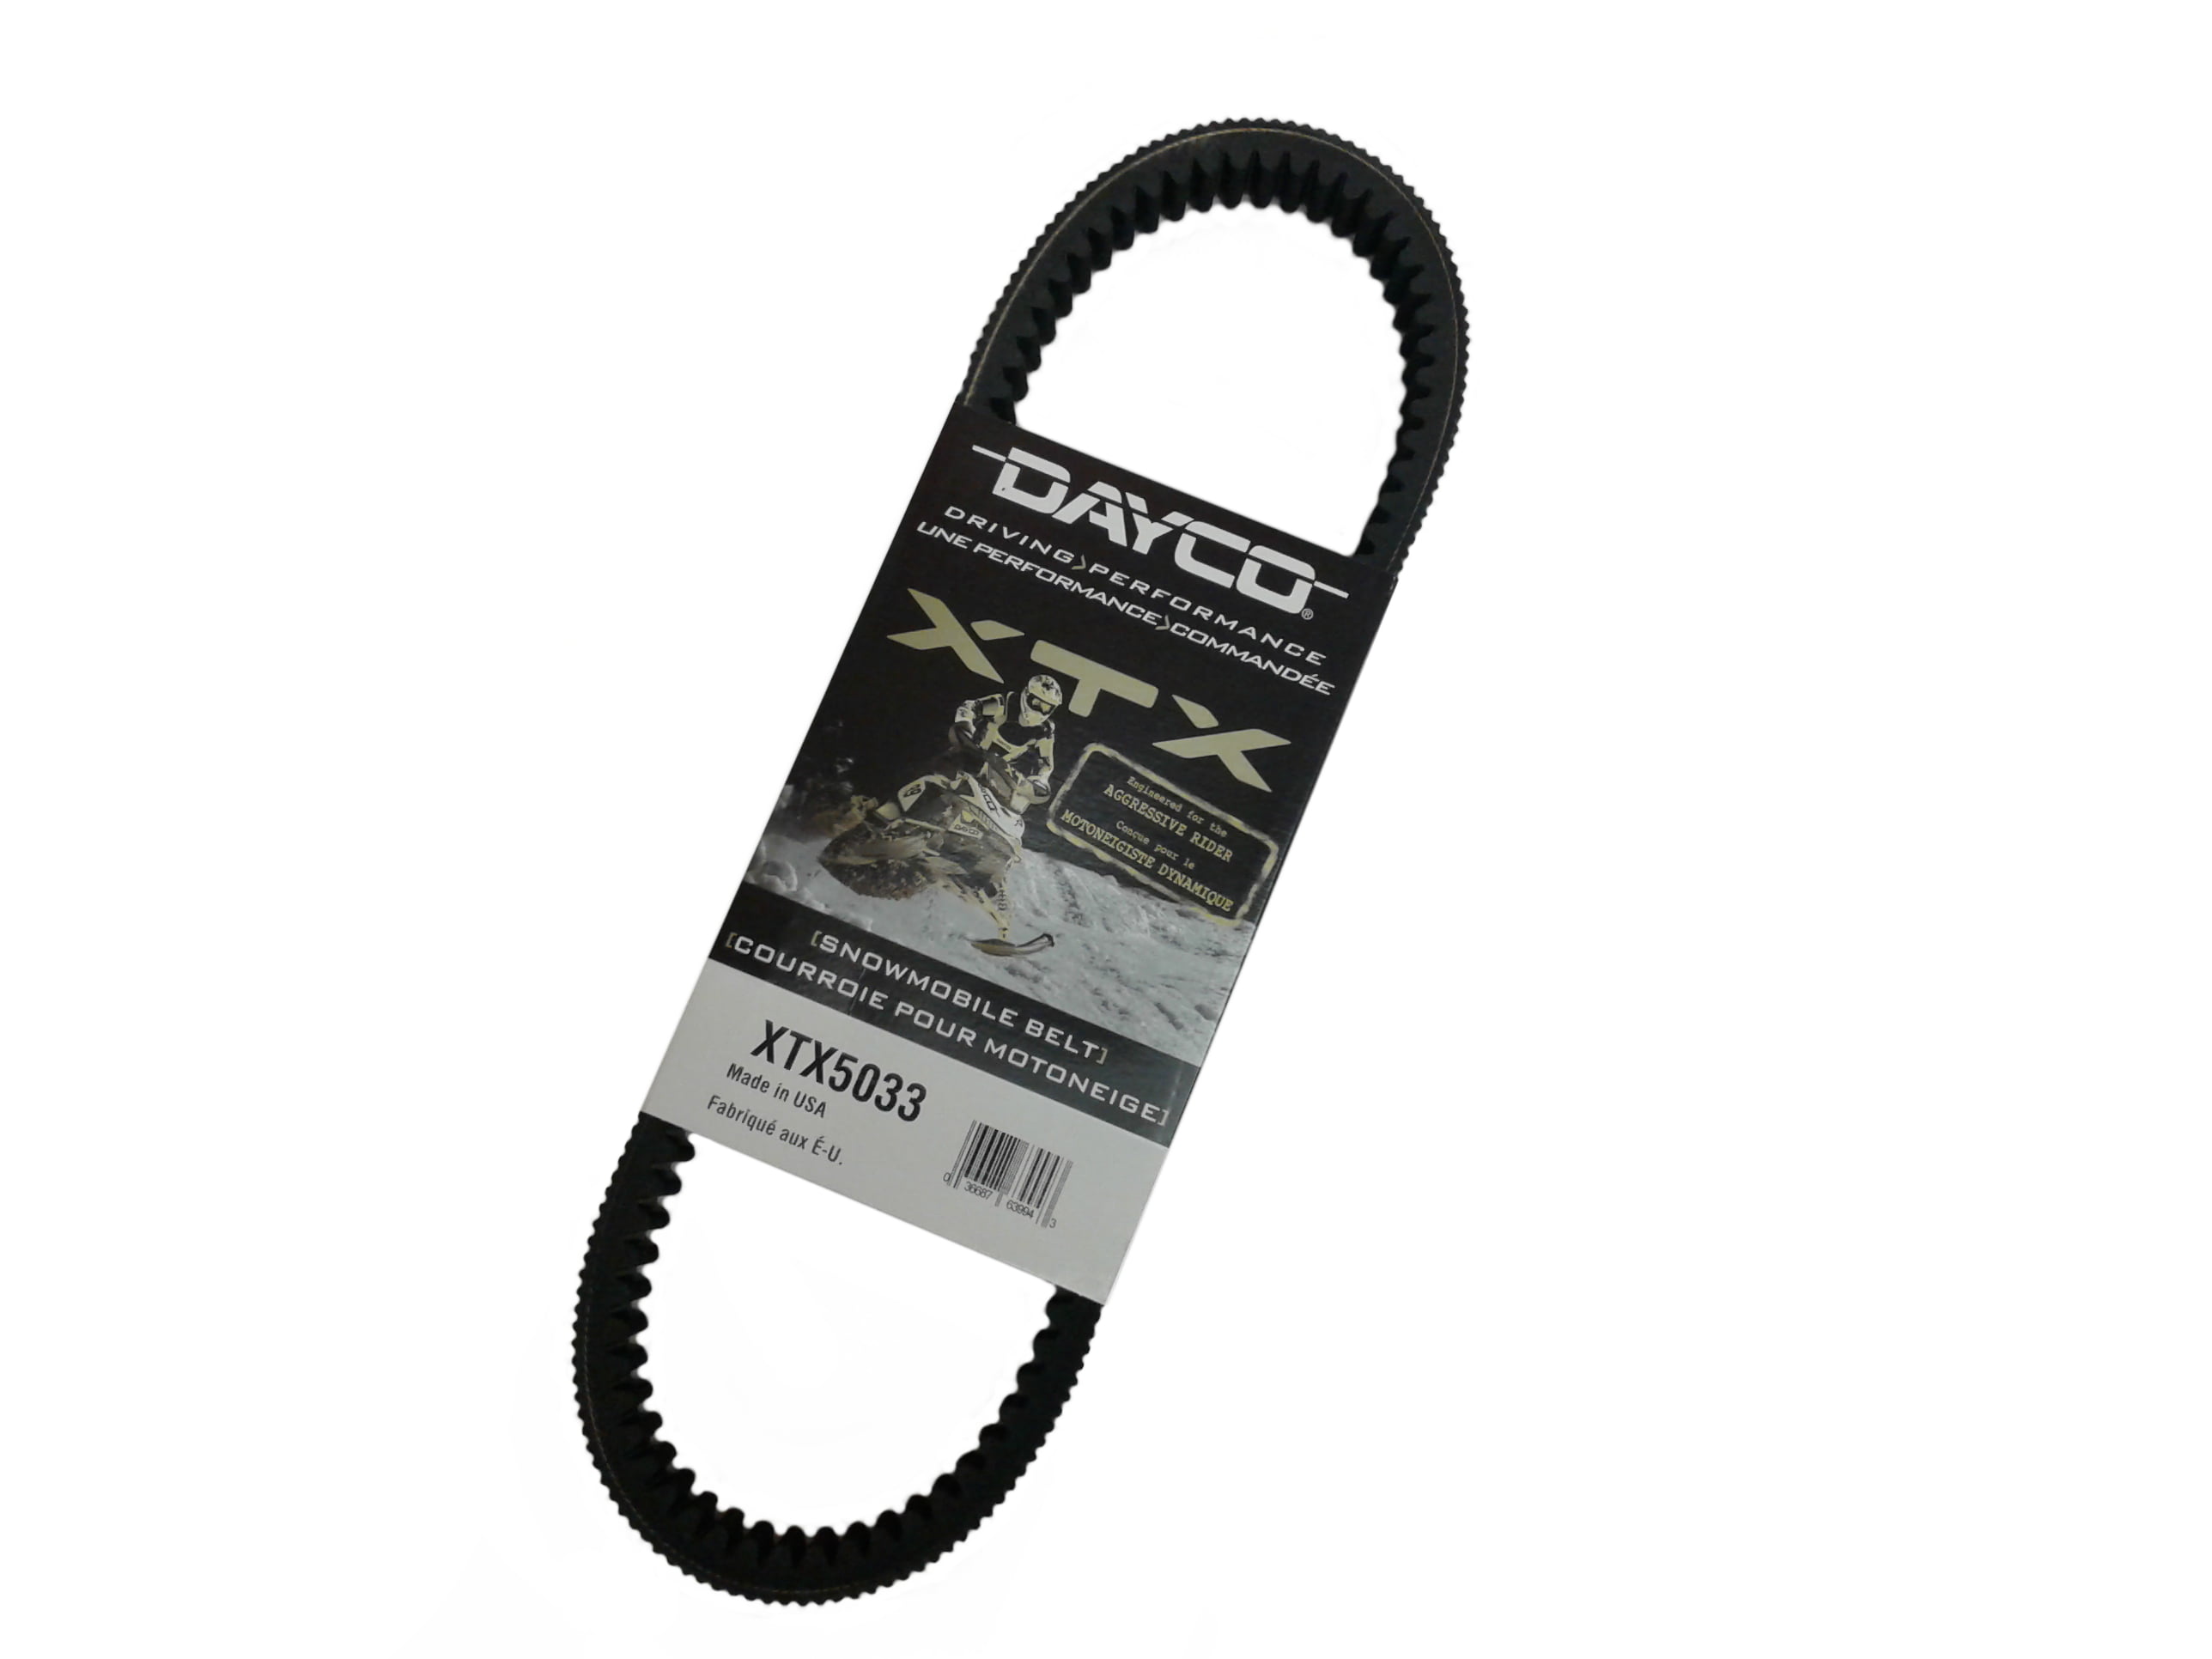 8DN-17641-01 fits 8DN-17641-00 Dayco Drive Belt for Yamaha Snowmobile 